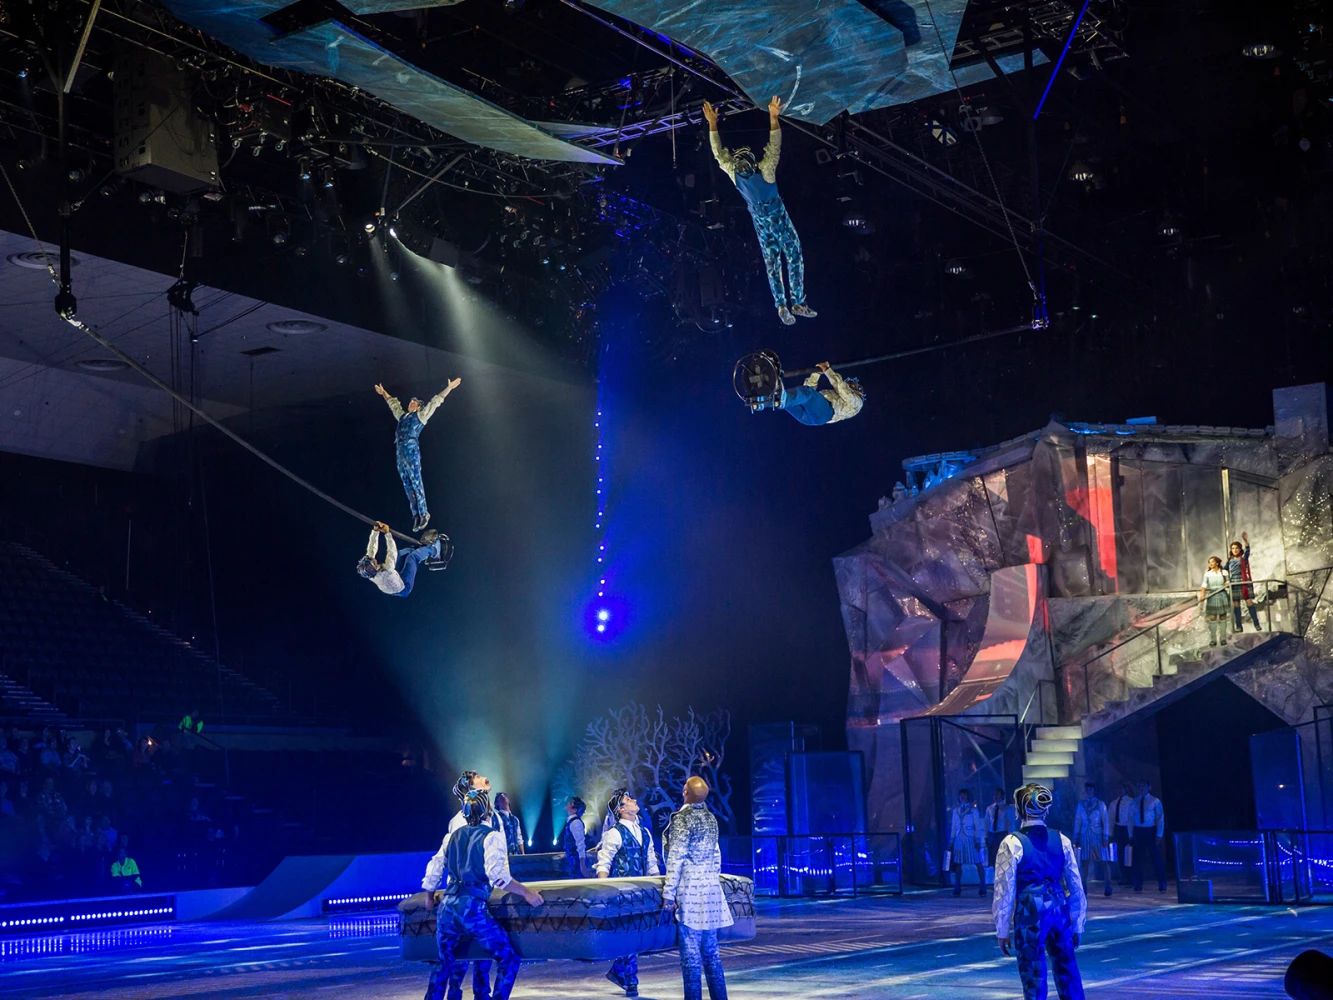 Cirque du Soleil: CRYSTAL: What to expect - 5